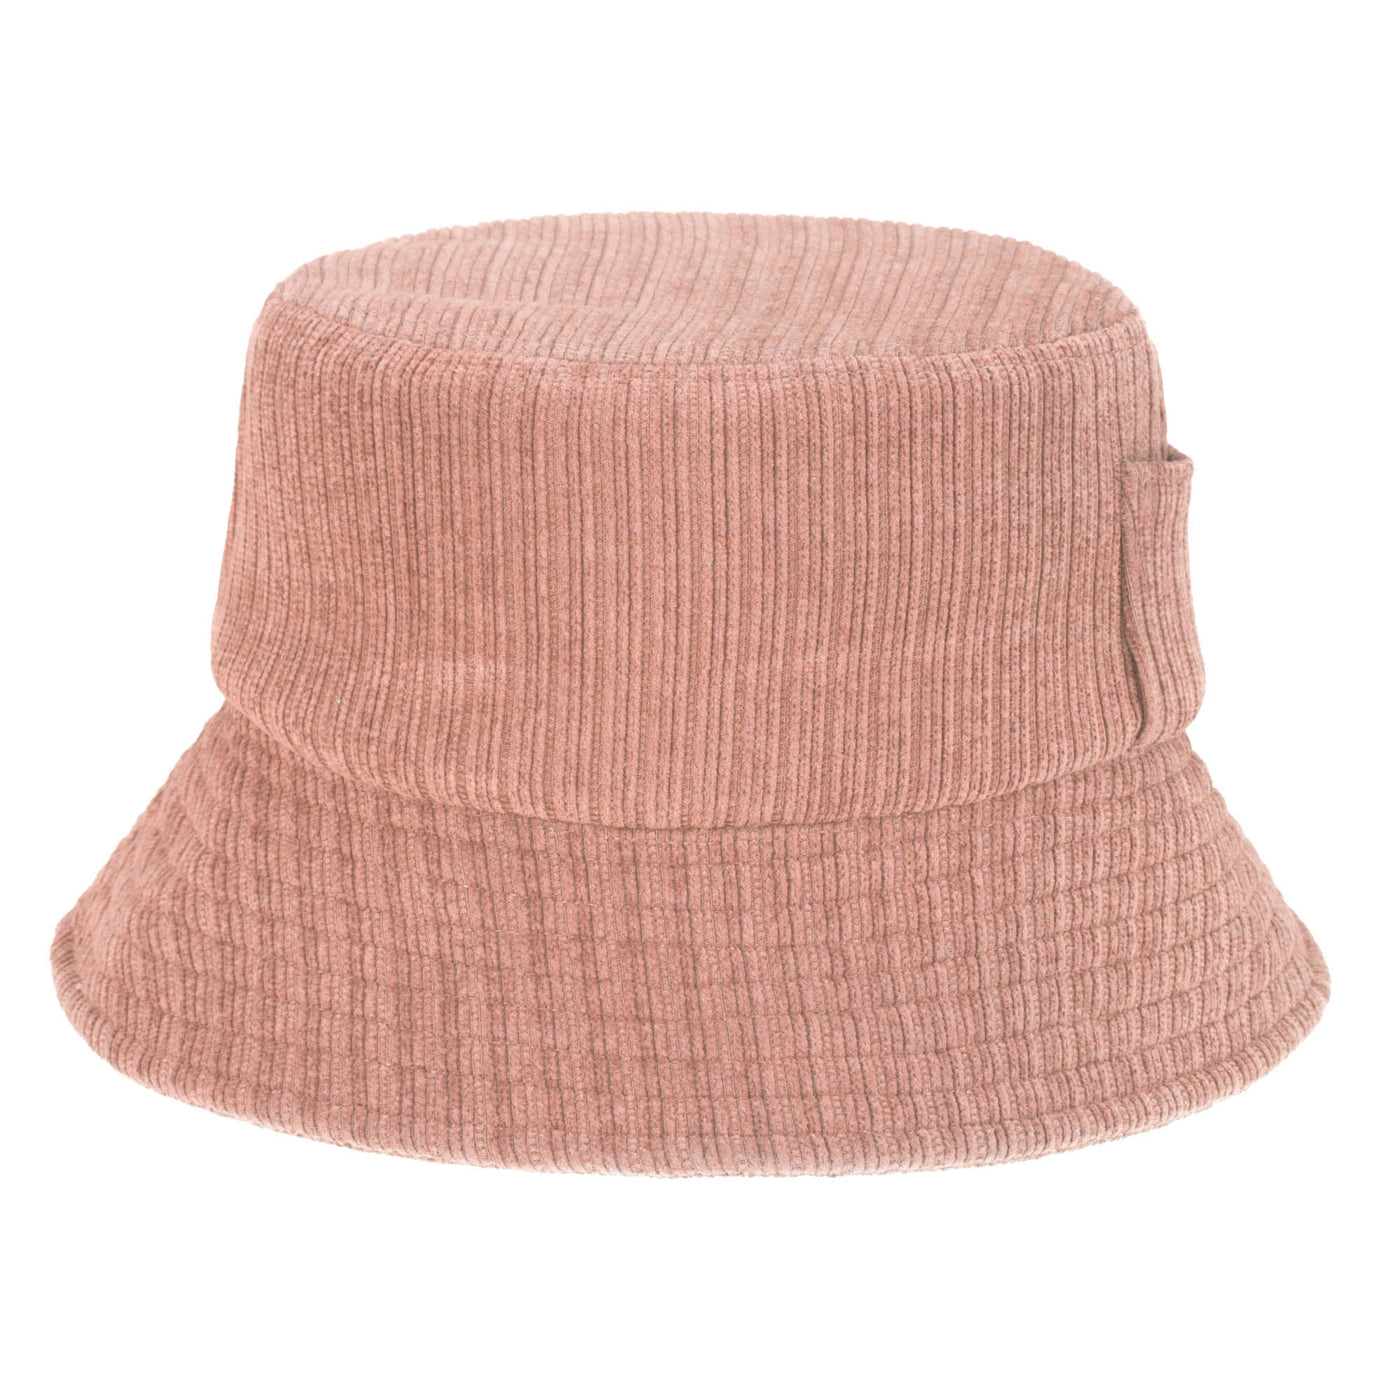 Cozy Women\'s – Chic Hat Bucket Hat Diego San and Company